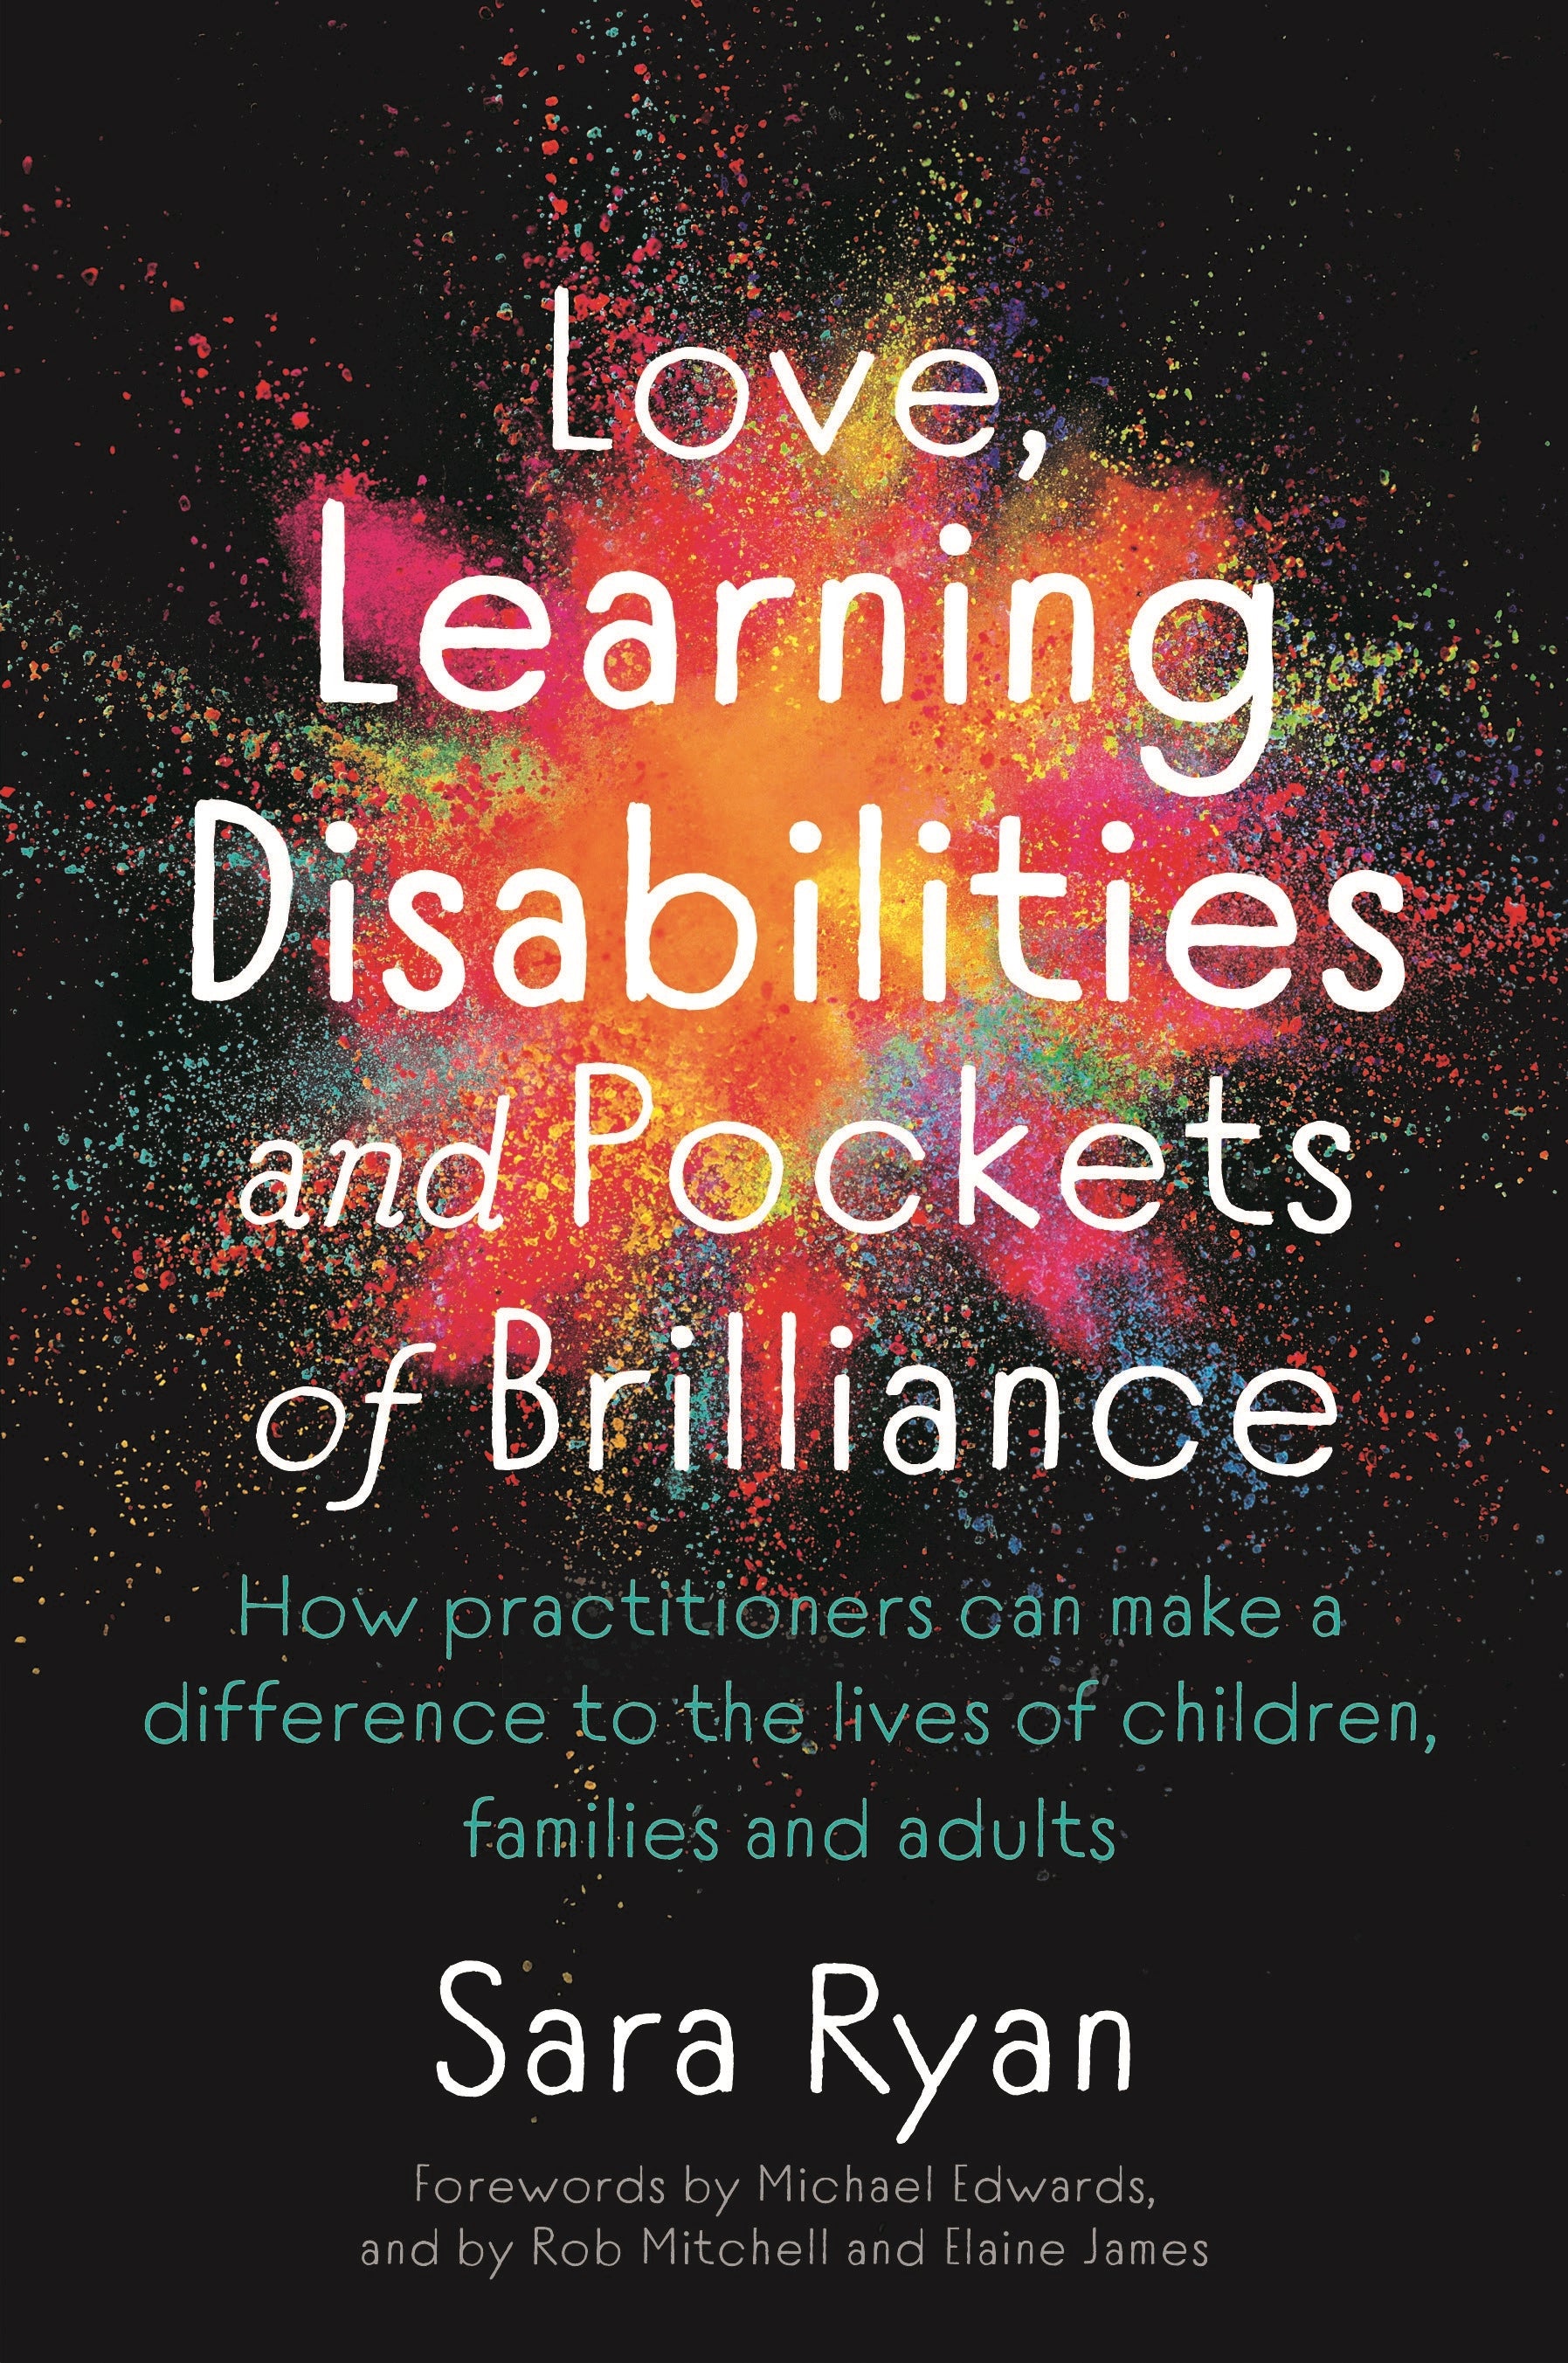 Love, Learning Disabilities and Pockets of Brilliance by Sara Ryan